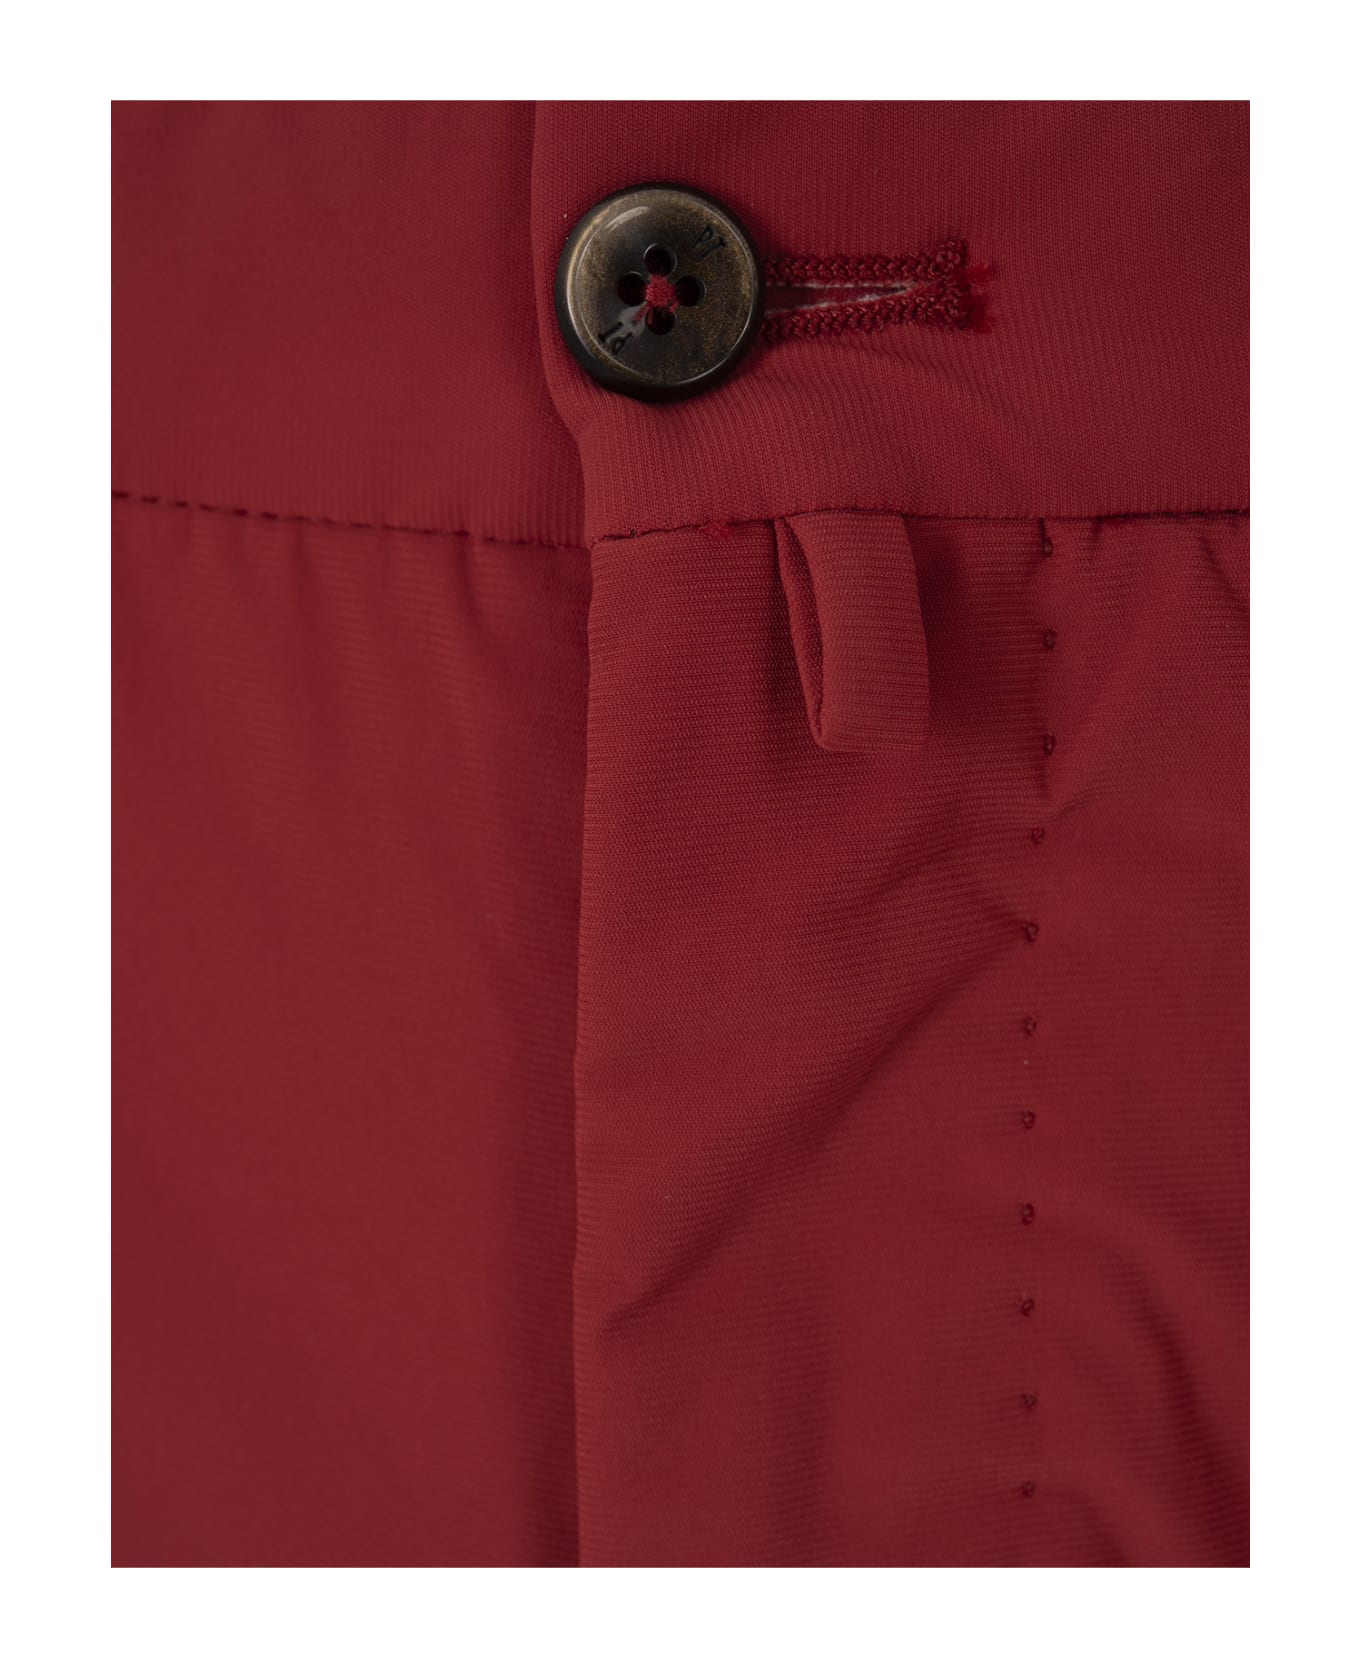 PT Bermuda Red Stretch Cotton Shorts - Red